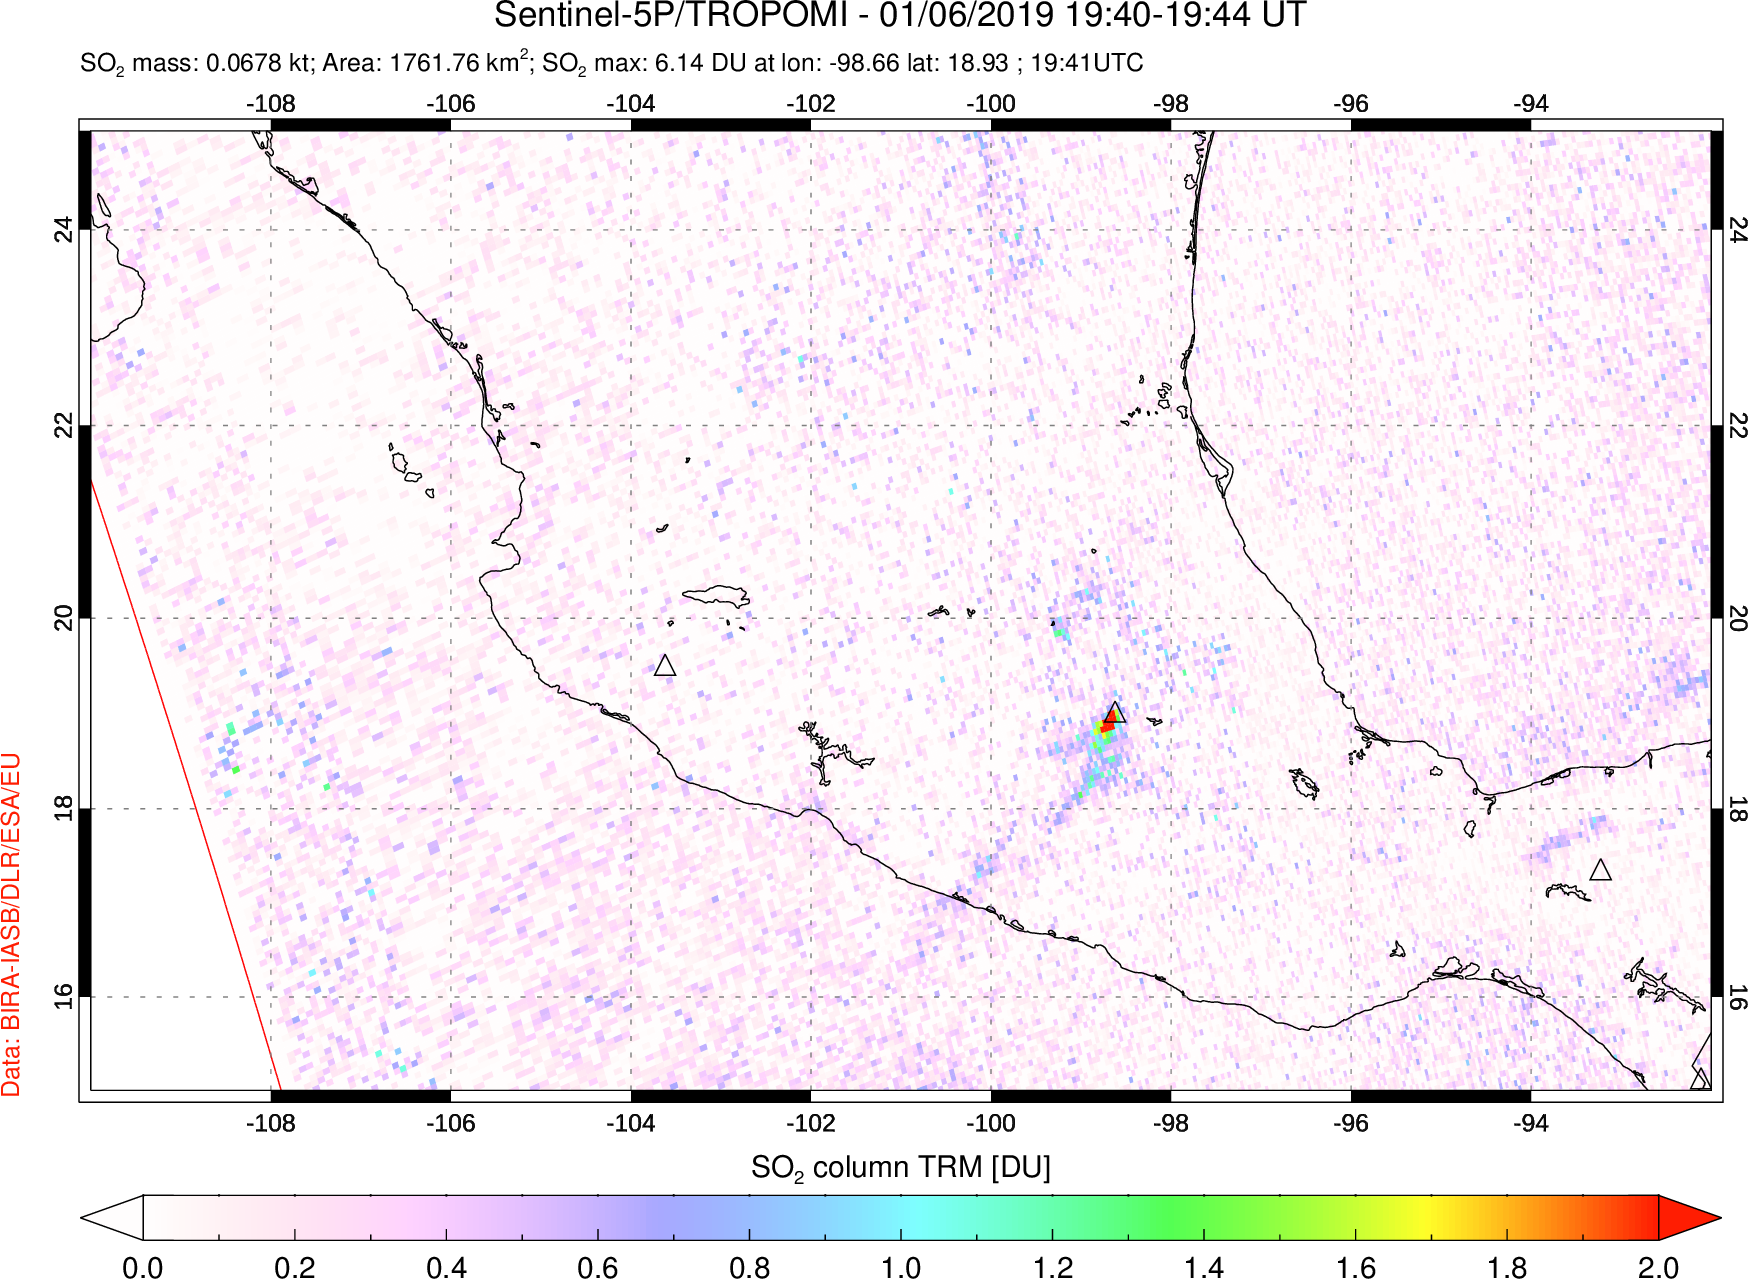 A sulfur dioxide image over Mexico on Jan 06, 2019.